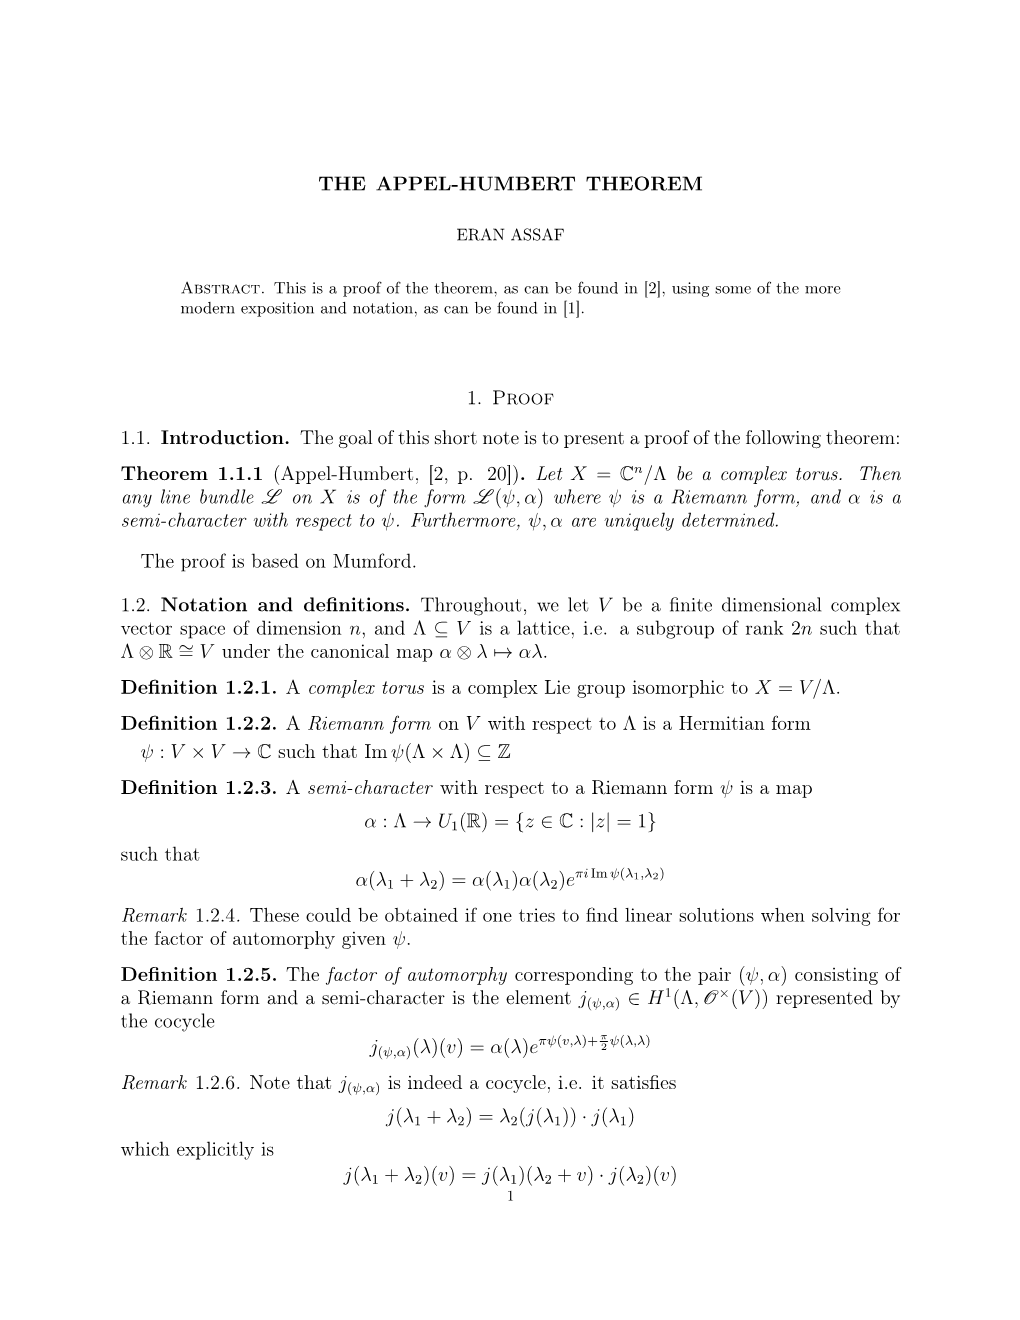 THE APPEL-HUMBERT THEOREM 1. Proof 1.1. Introduction. the Goal of This Short Note Is to Present a Proof of the Following Theorem